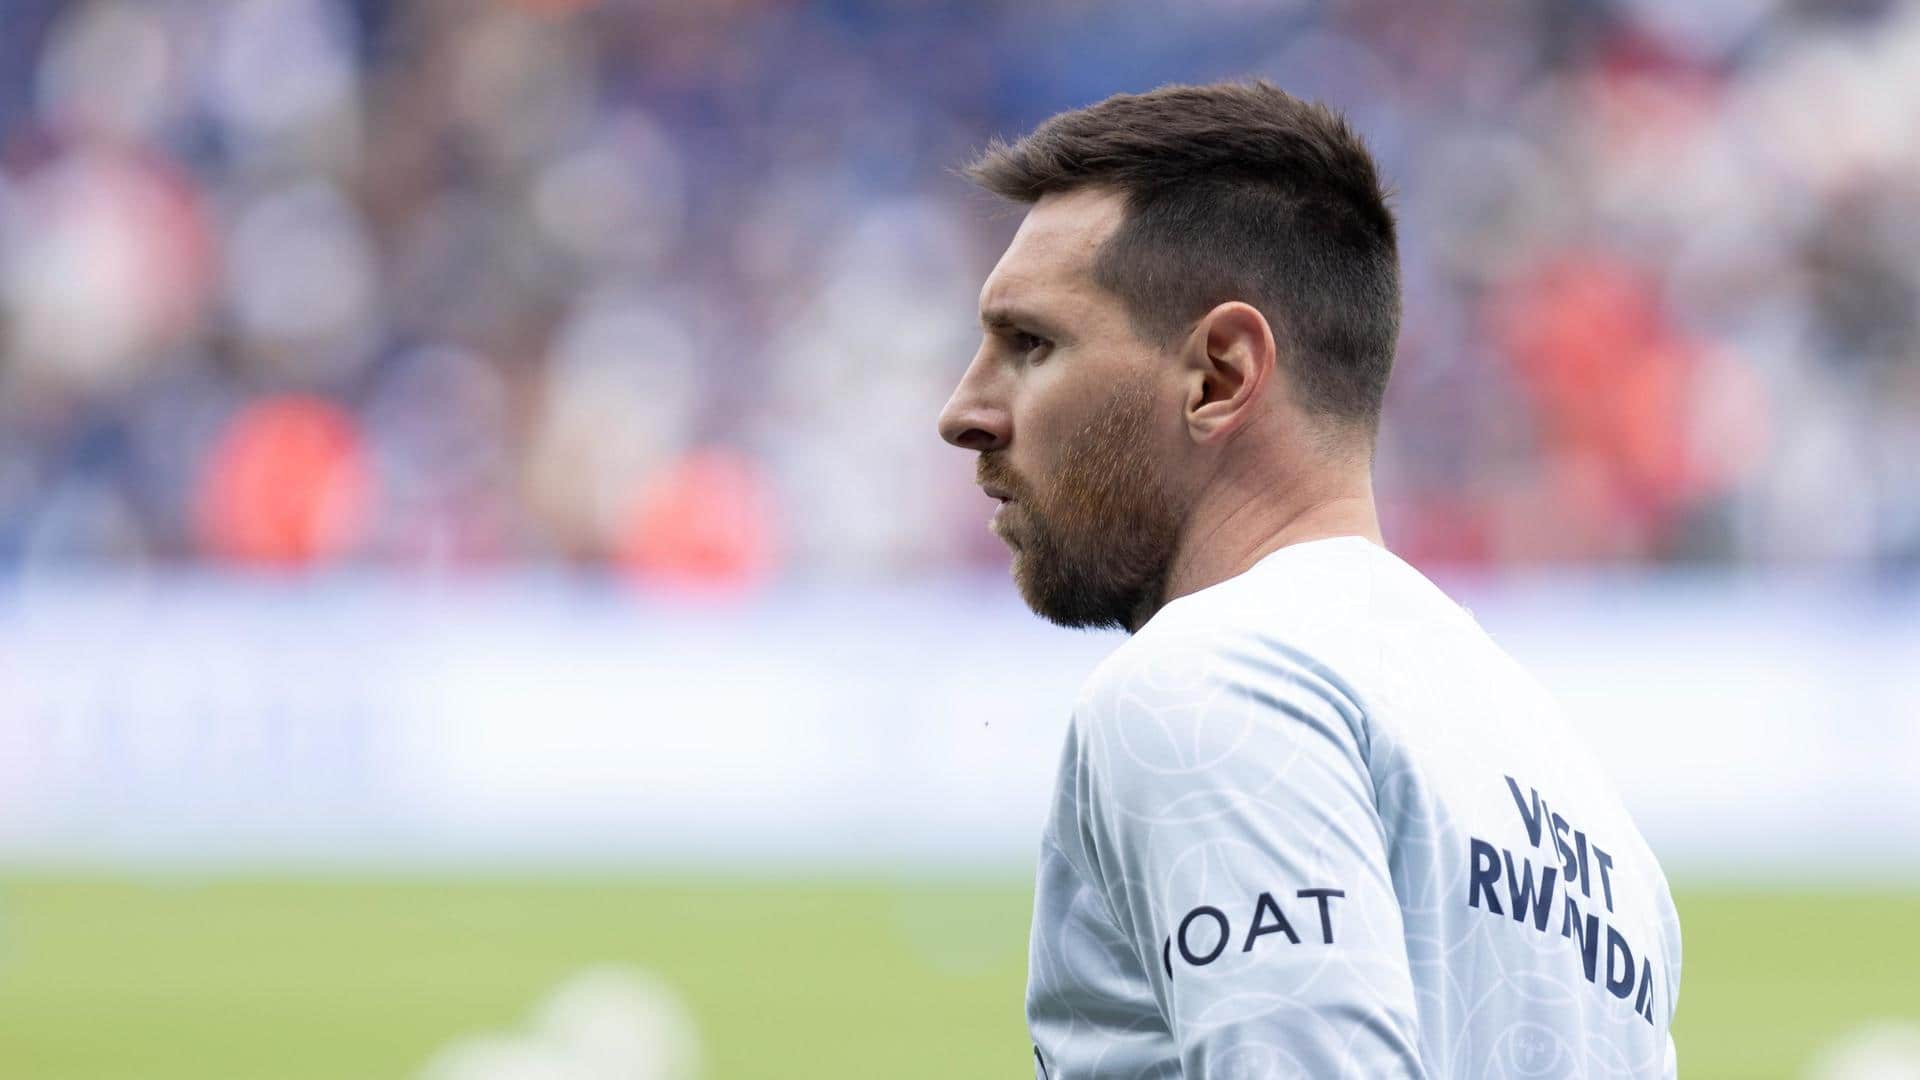 Lionel Messi handed a two-week suspension by PSG: Here's why